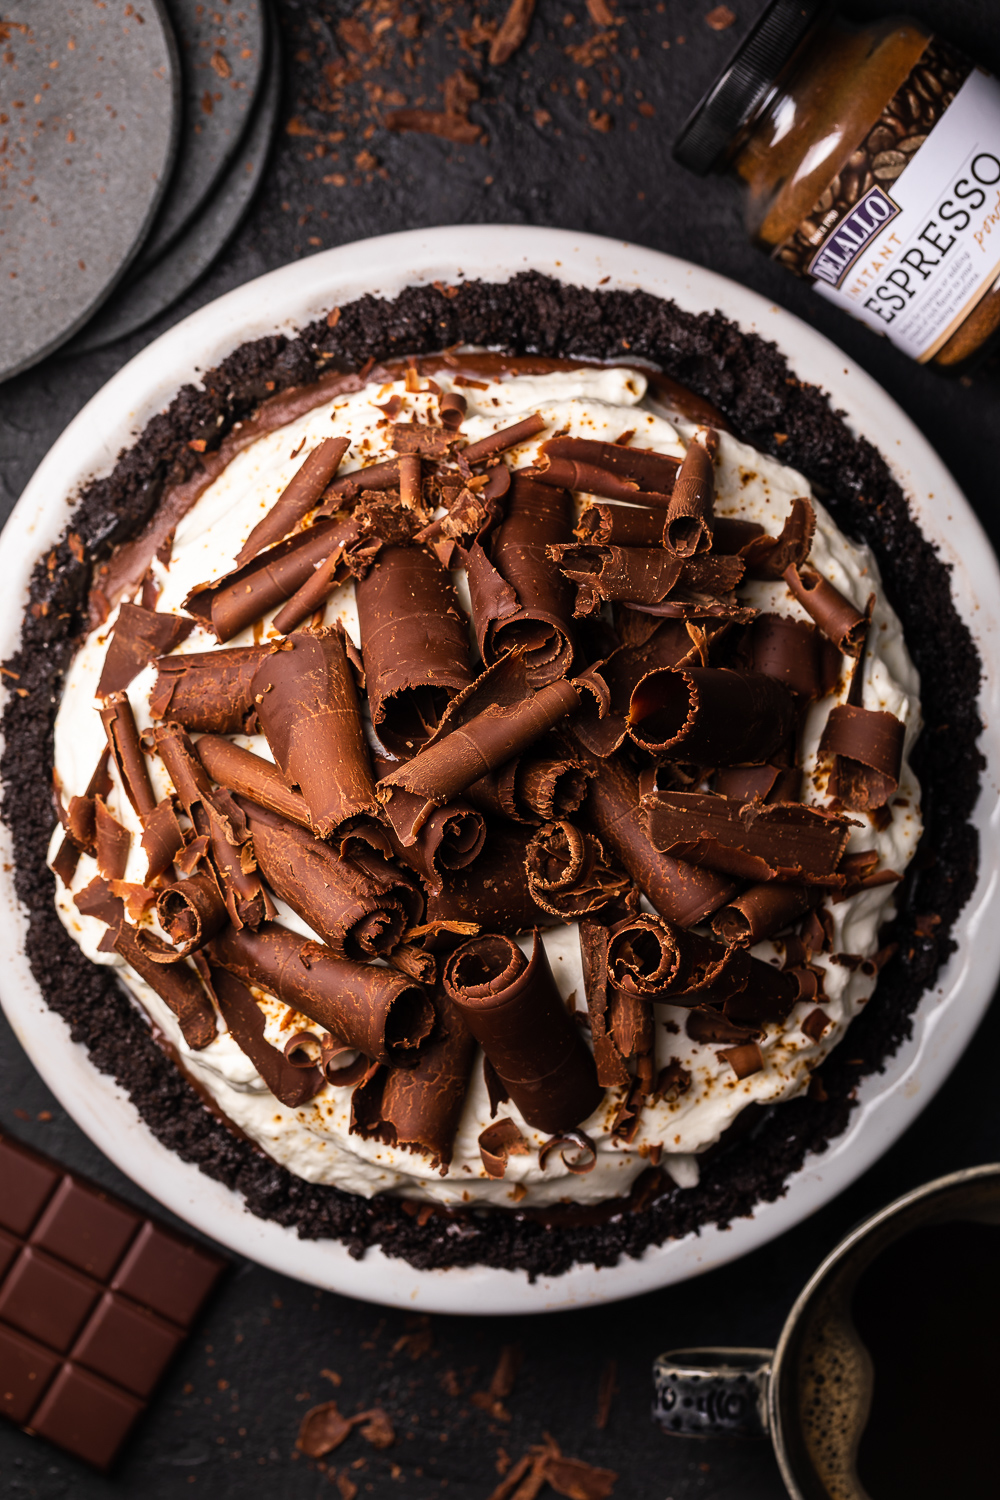 This over-the-top Espresso Chocolate Pudding Pie is a chocolate lovers dream come true! Featuring a chocolate cookie crust, silky smooth espresso chocolate pudding, and a luscious layer of freshly whipped cream, this recipe is always a crowd-pleaser! Top with chocolate curls for a show stopping presentation!